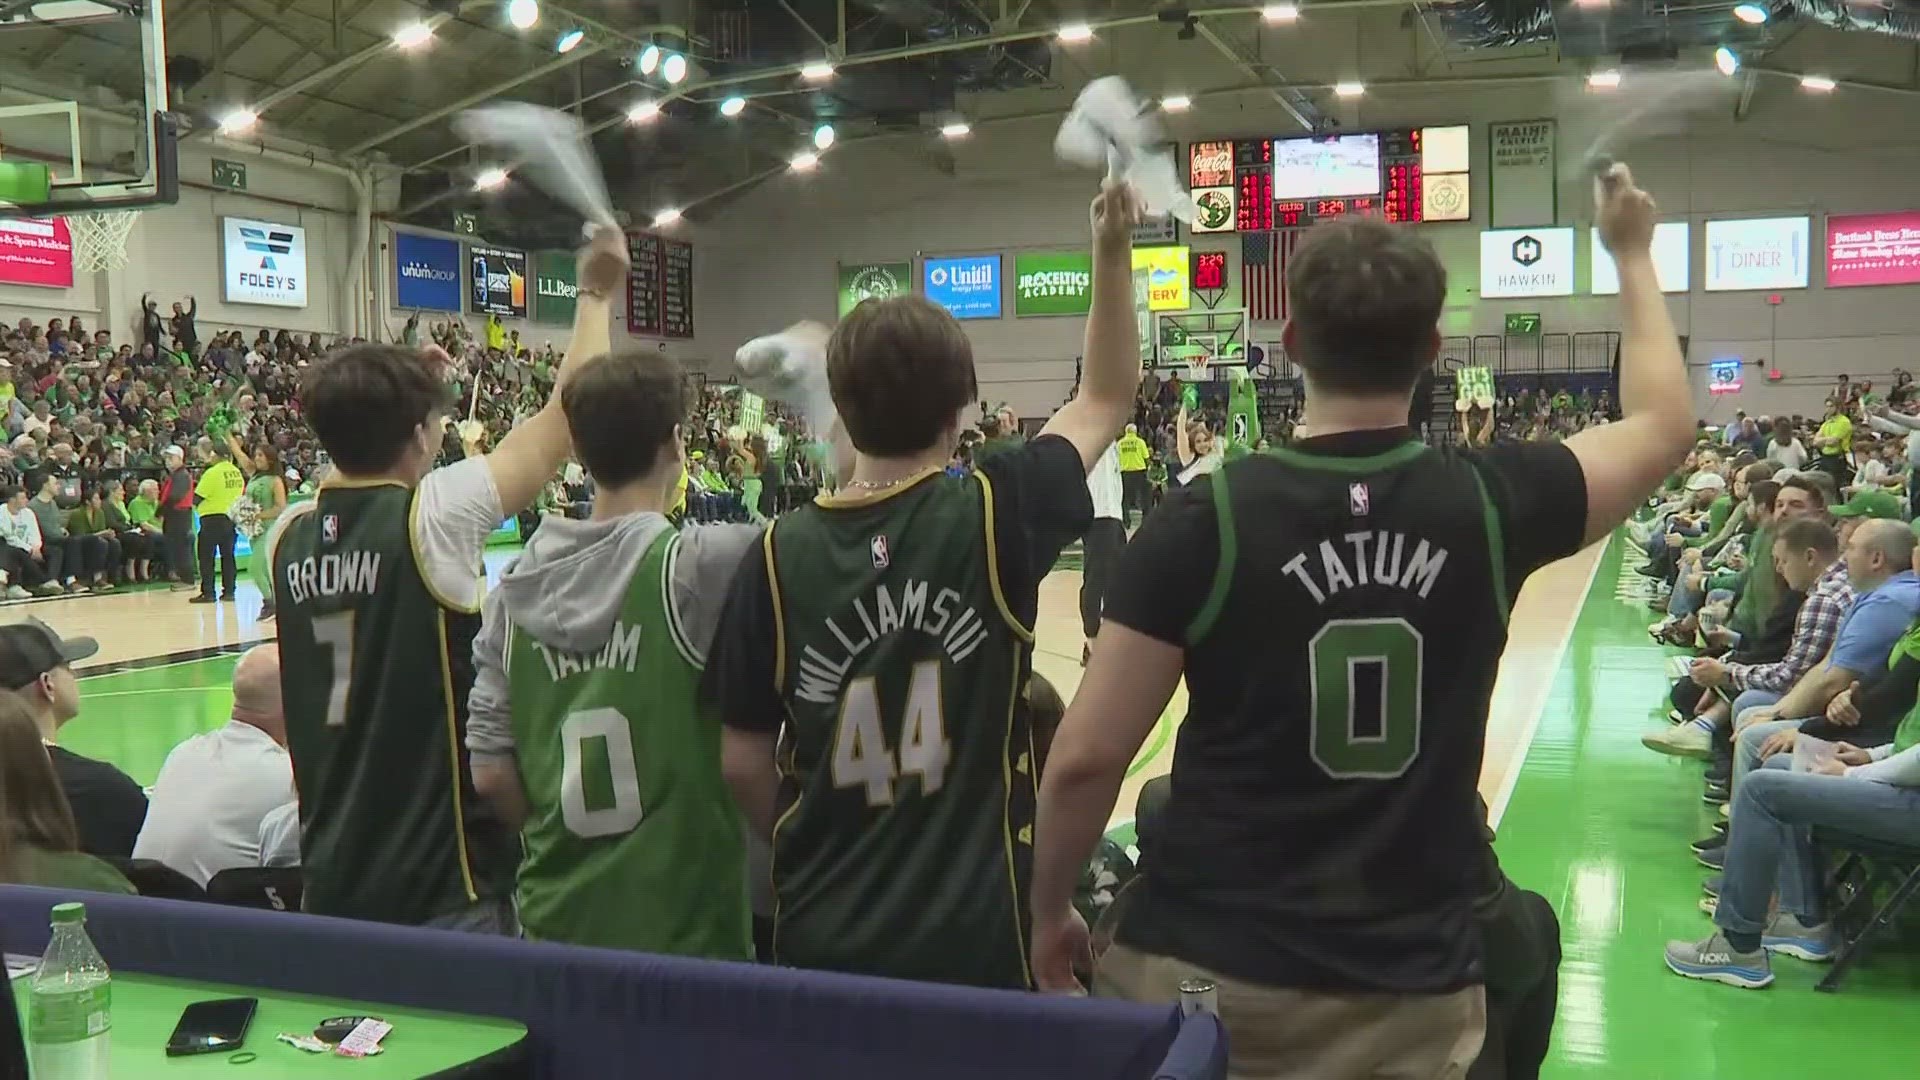 The Maine Celtics were seeking its first championship title in team history.